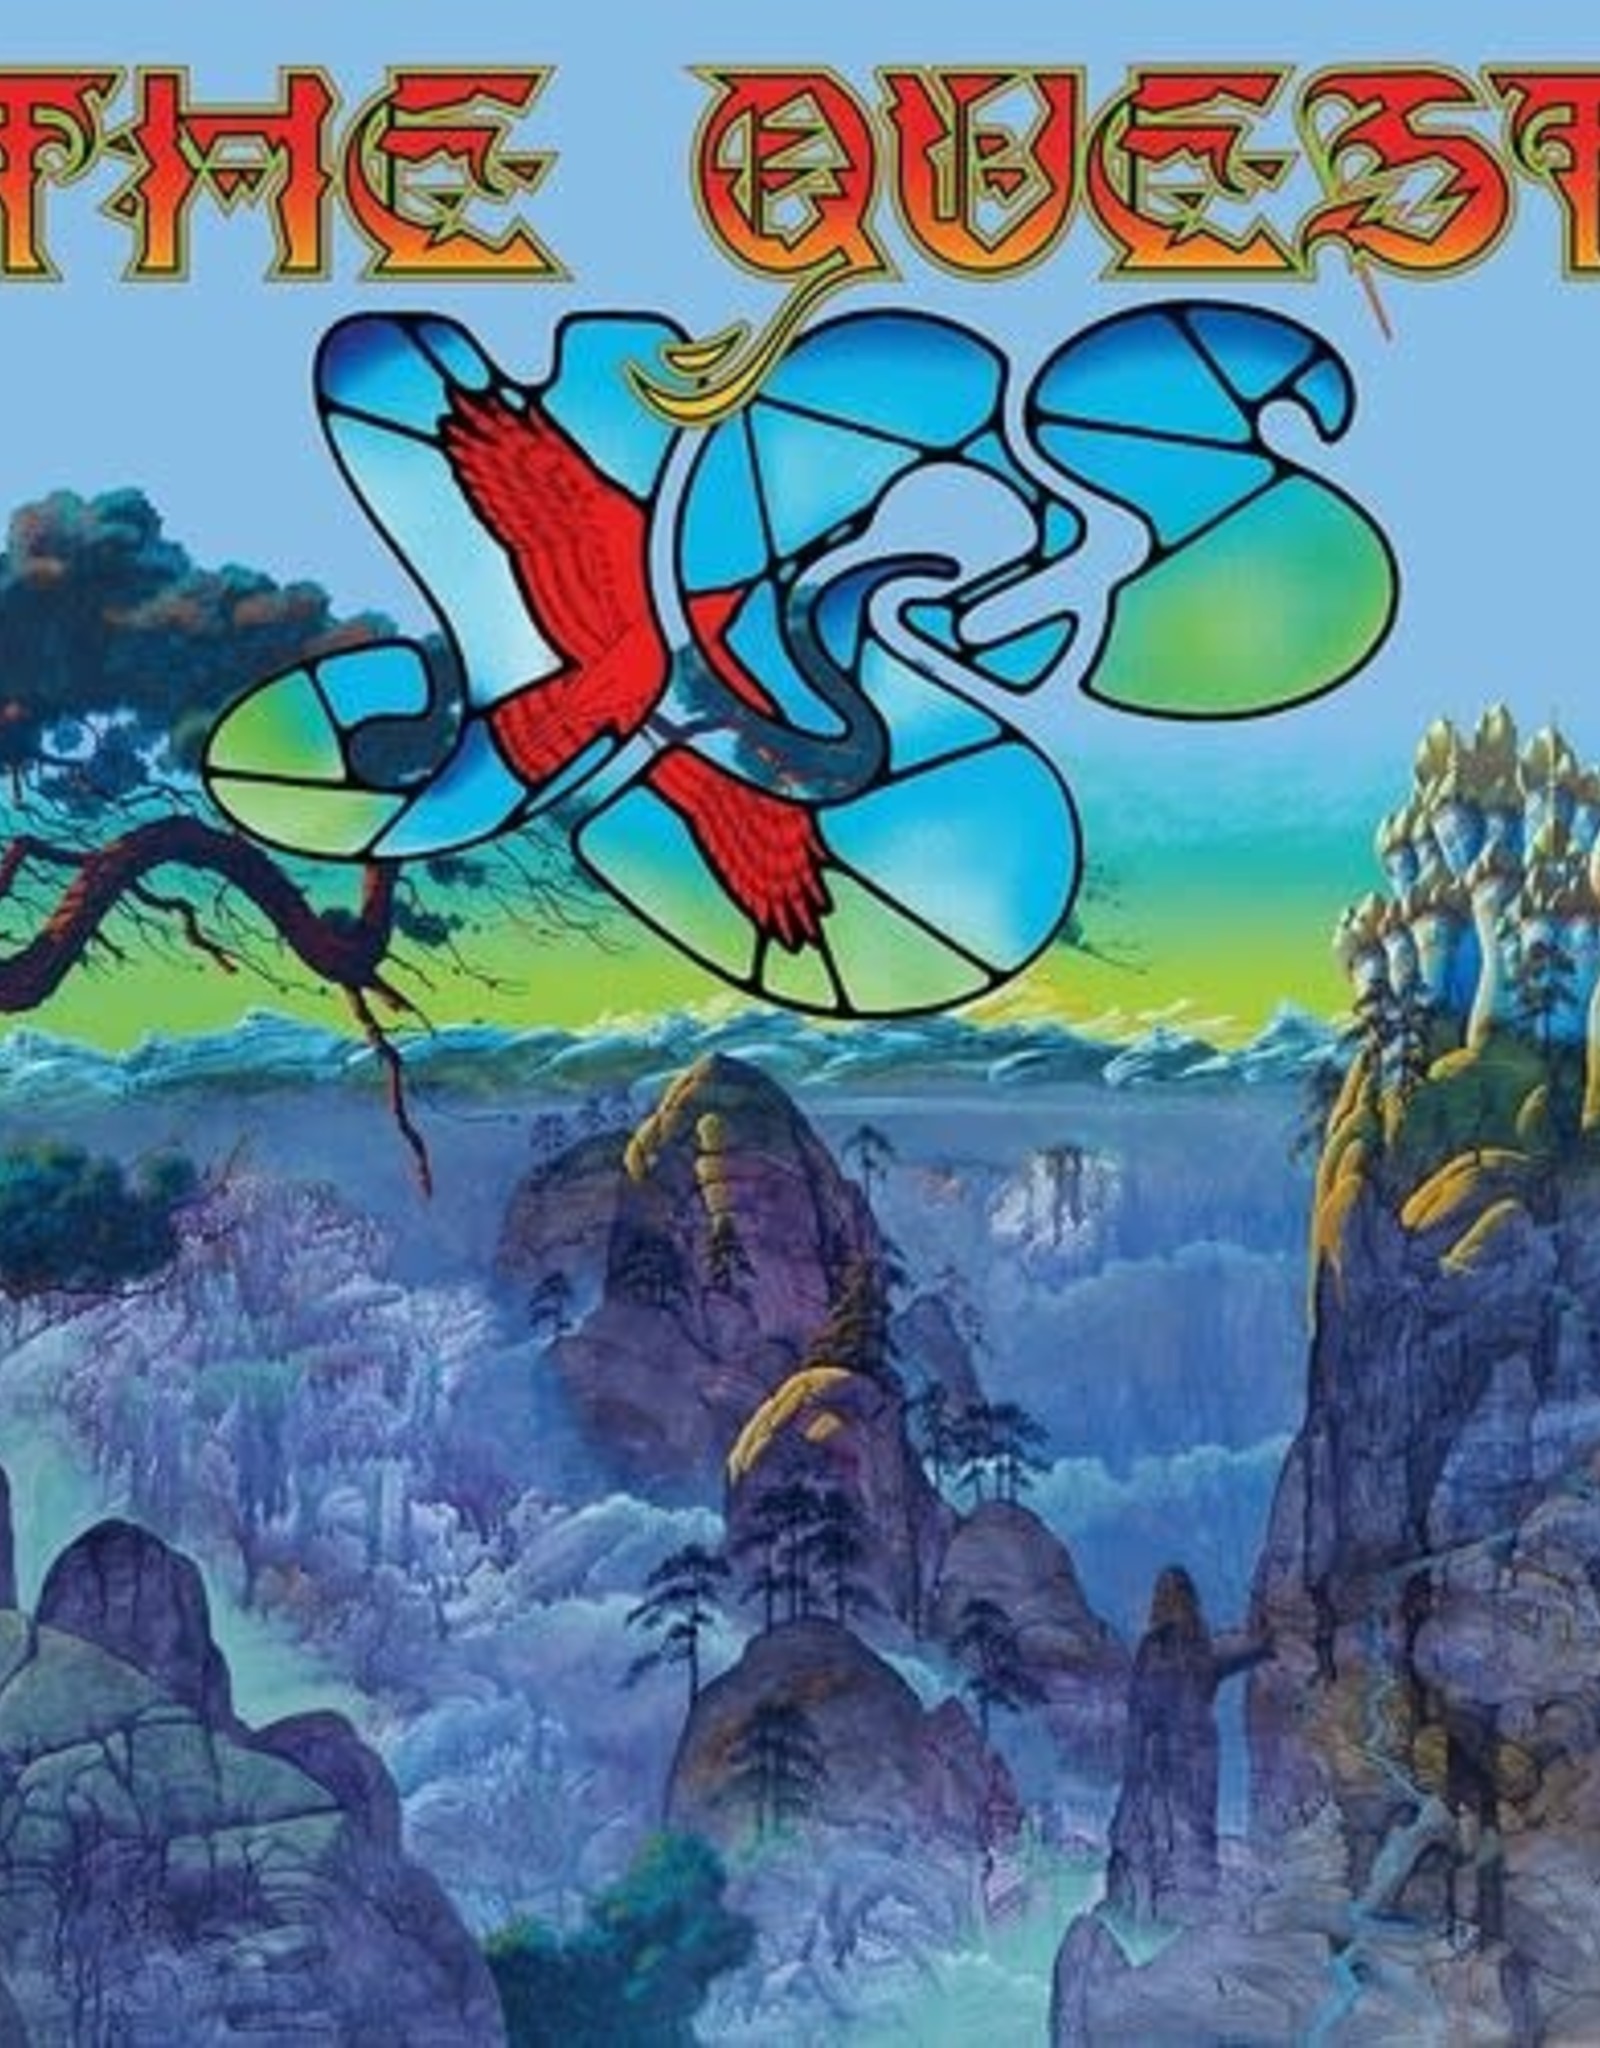 Yes - The Quest